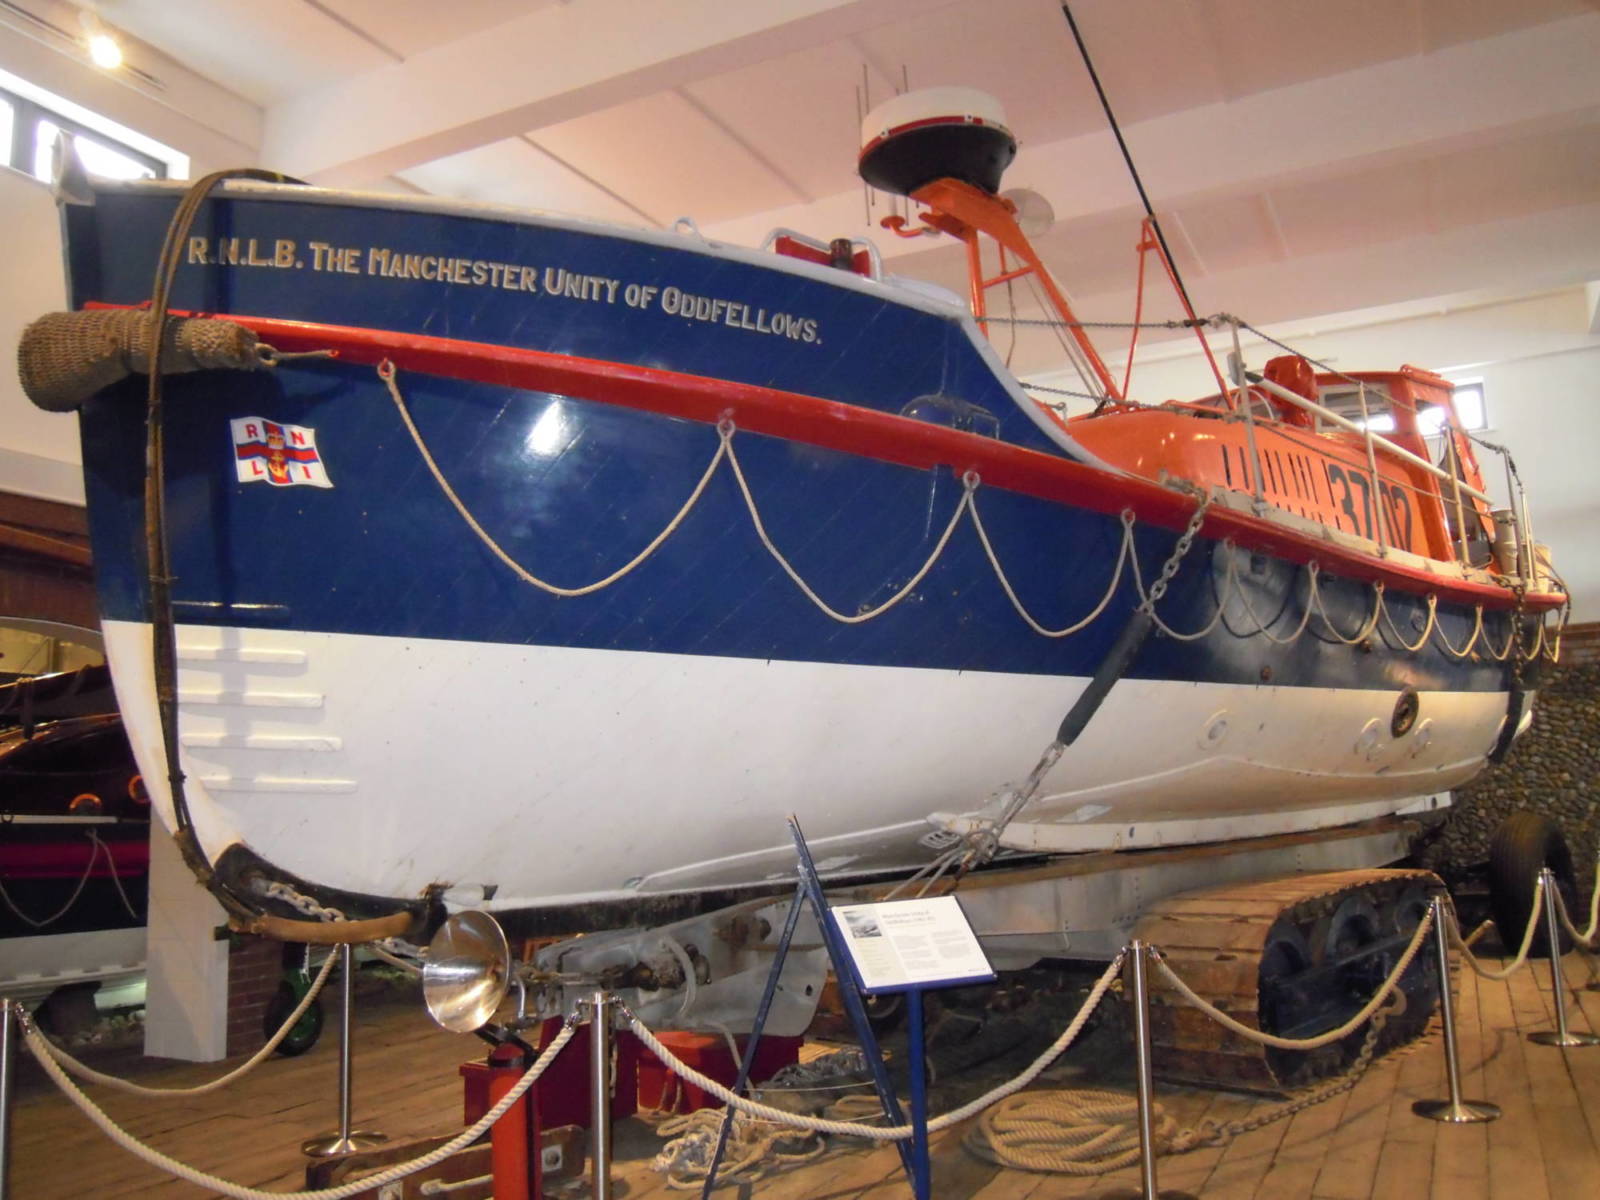 sheringham_lifeboat_the_manchester_unity_of_oddfellows_on960_sheringham_museum_29_03_2010_1